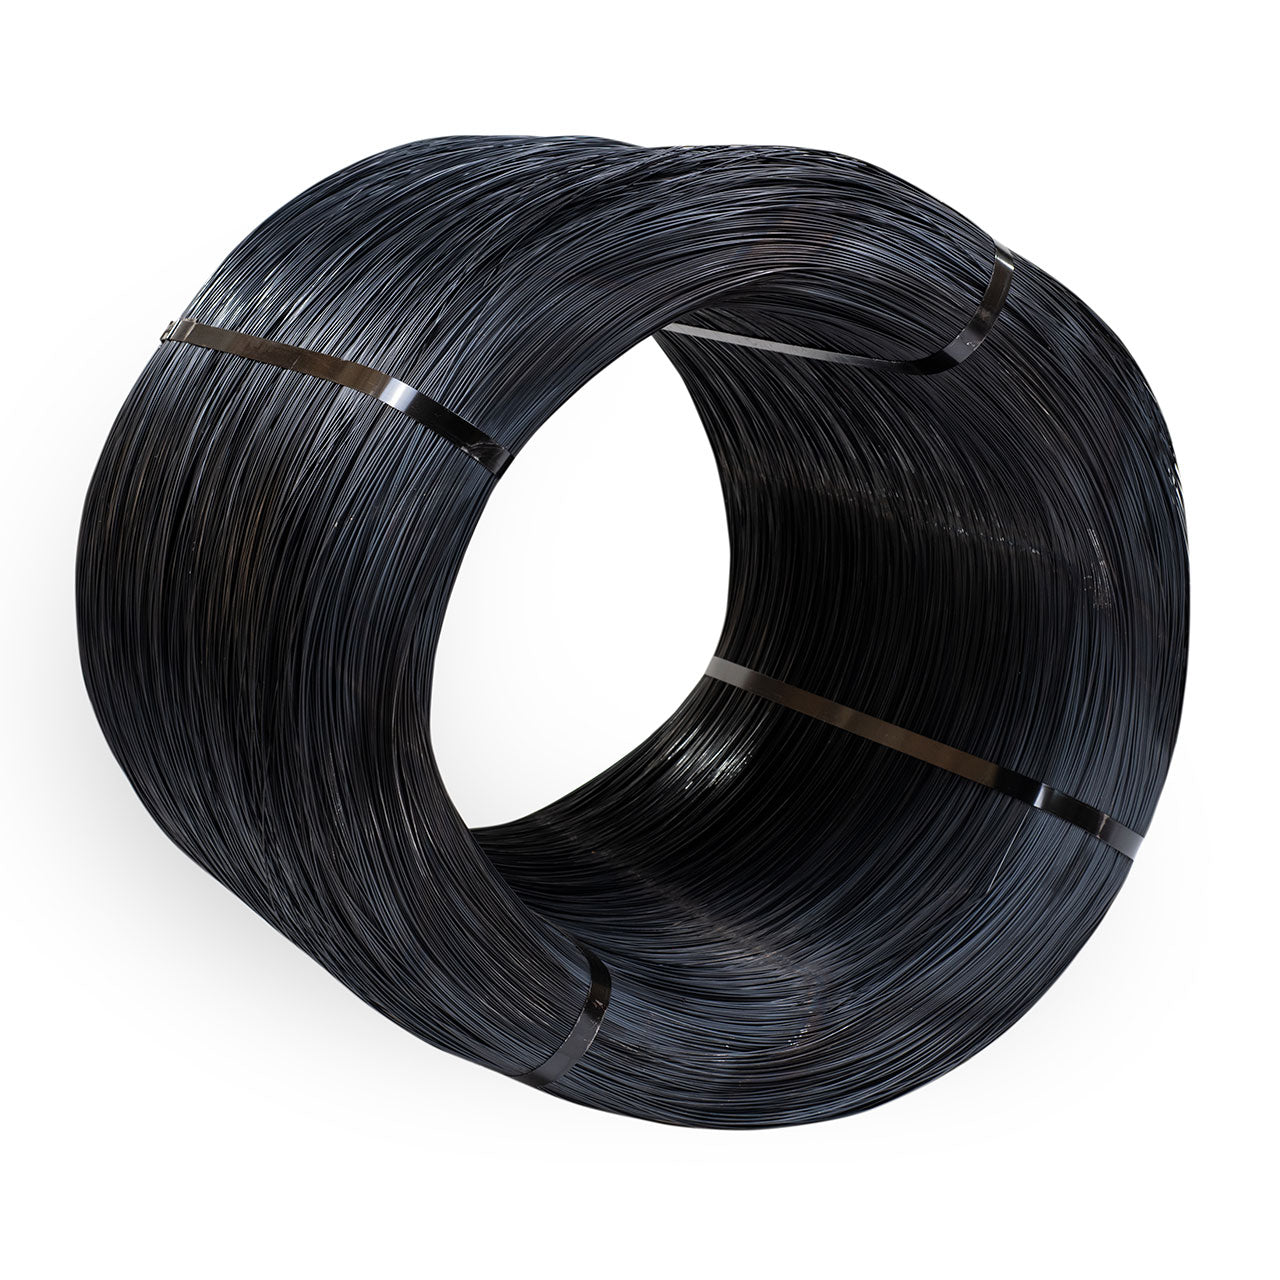 American Wire Tie Black Annealed 9 Gauge Wire 50 lb. Coil (sold per coil)